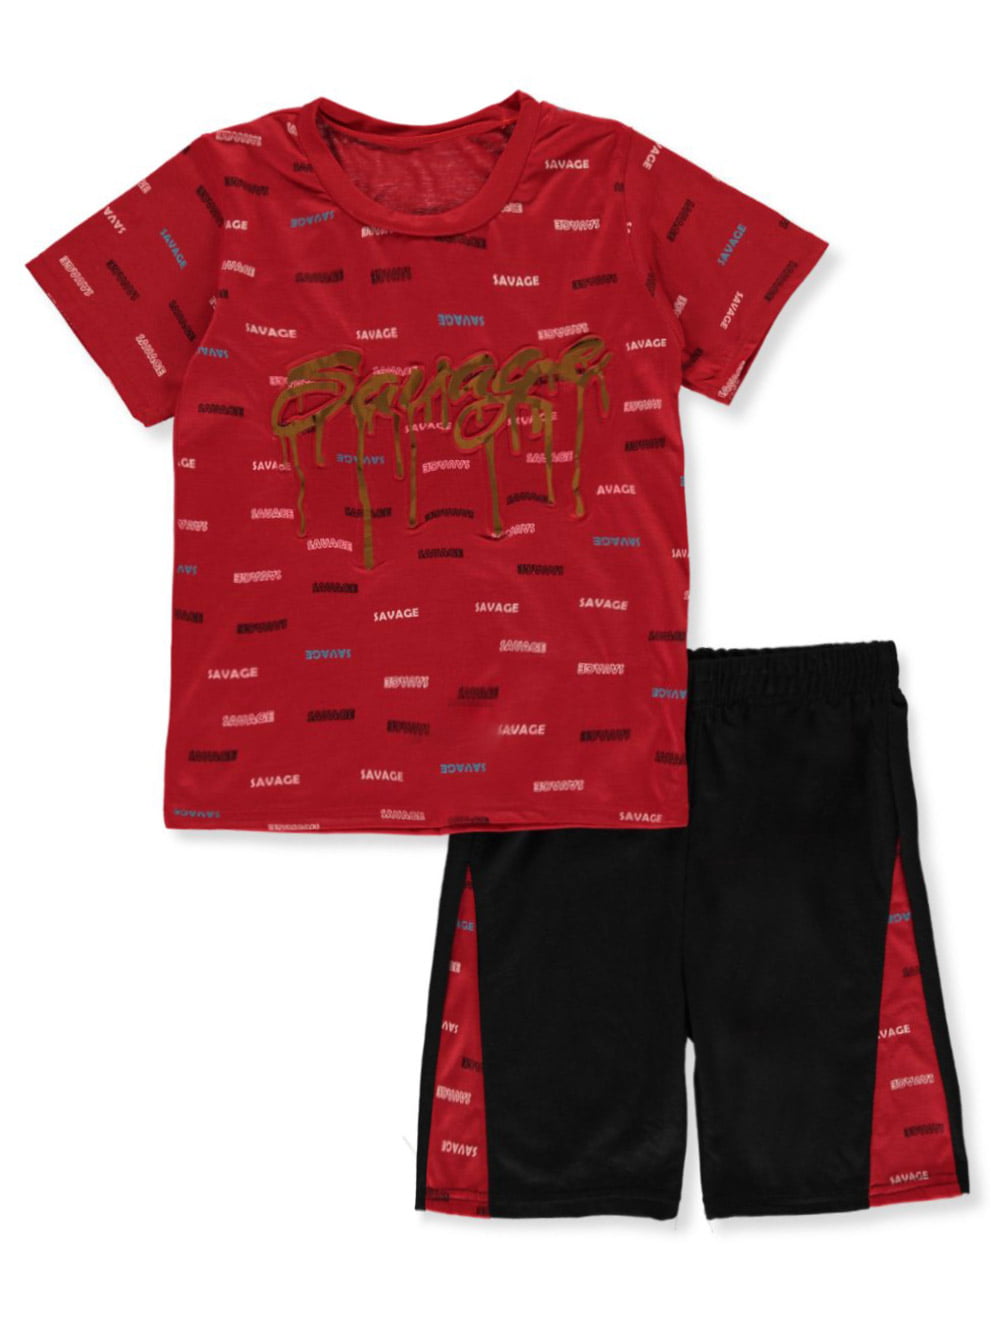 Under Armour 2T 3T 4T Red Black Athletic Outfit Set NEW 